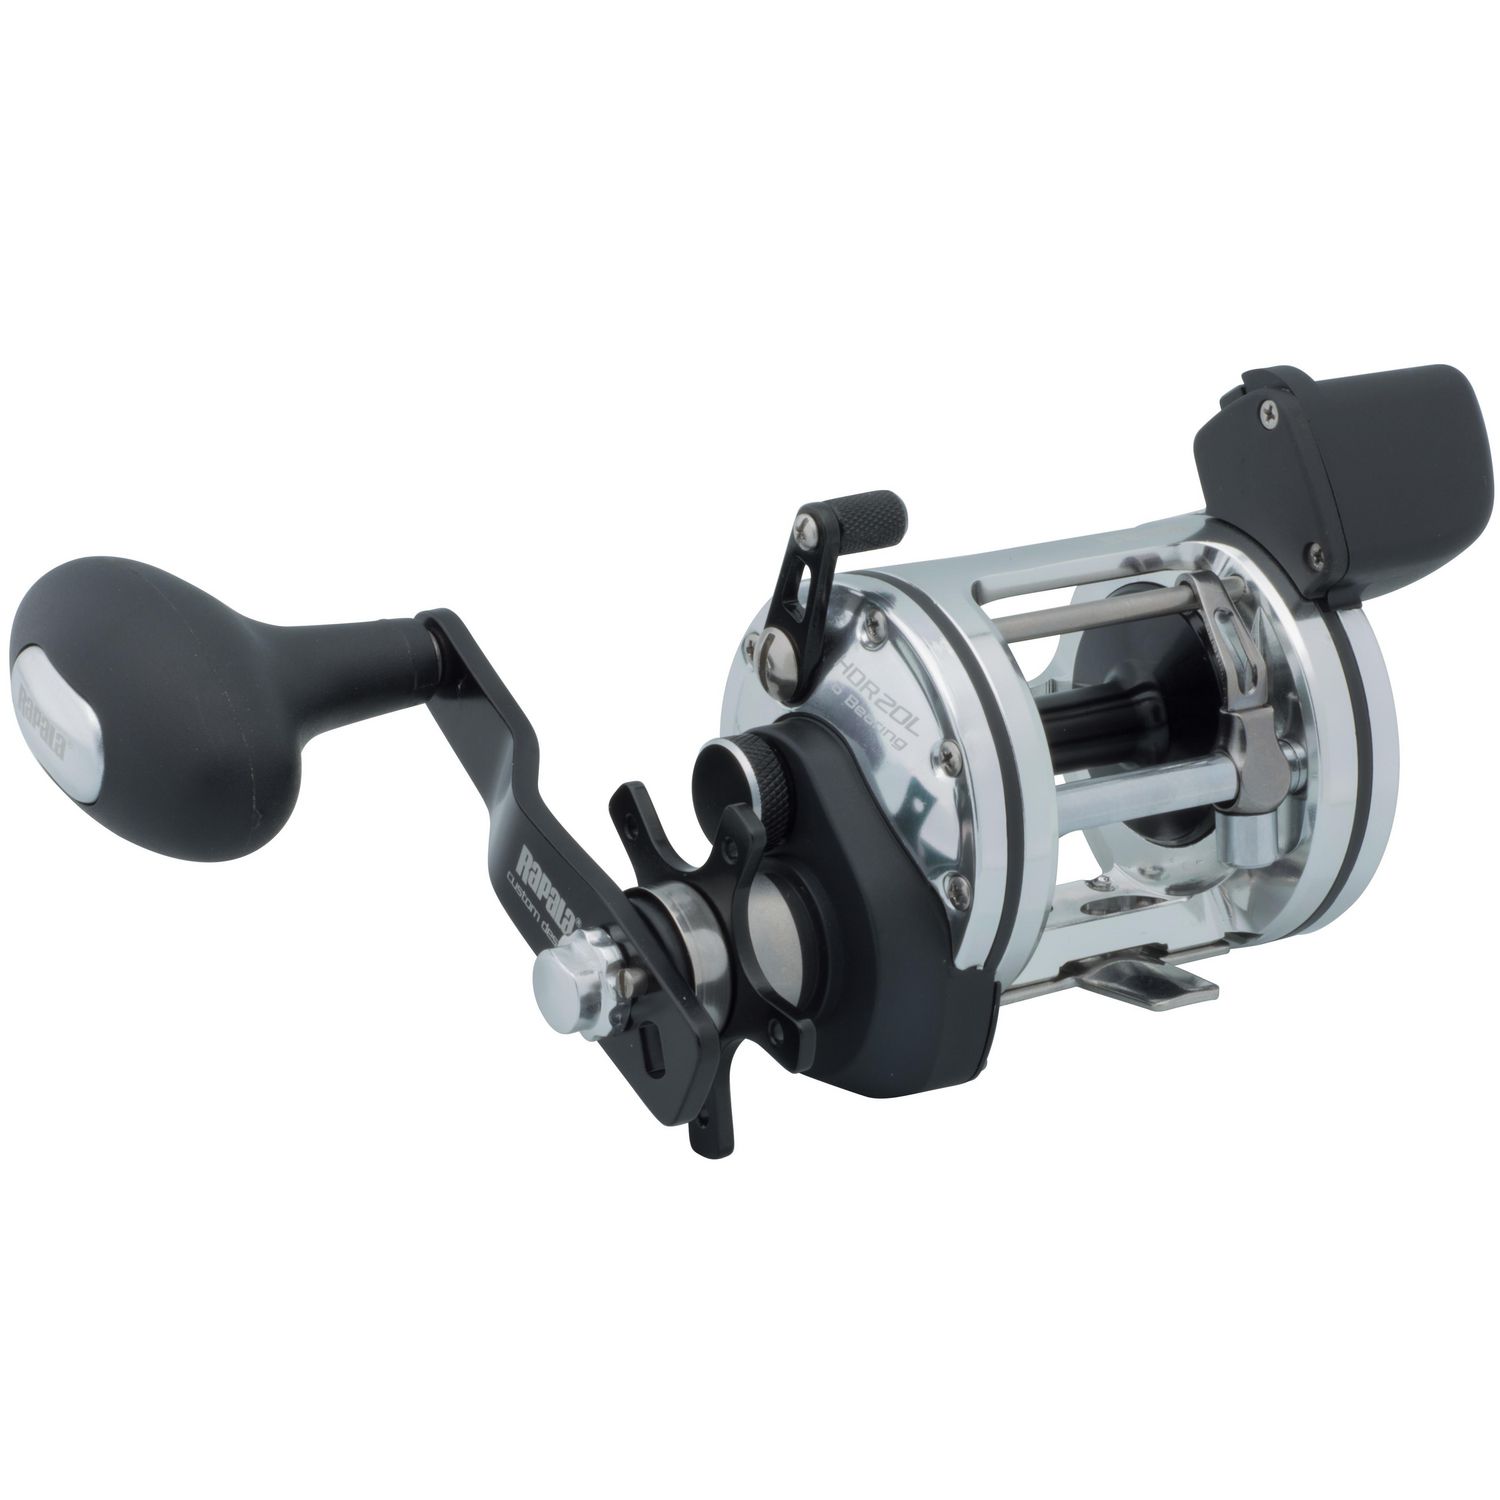 Rapala® Hydros Line Counter Reel 